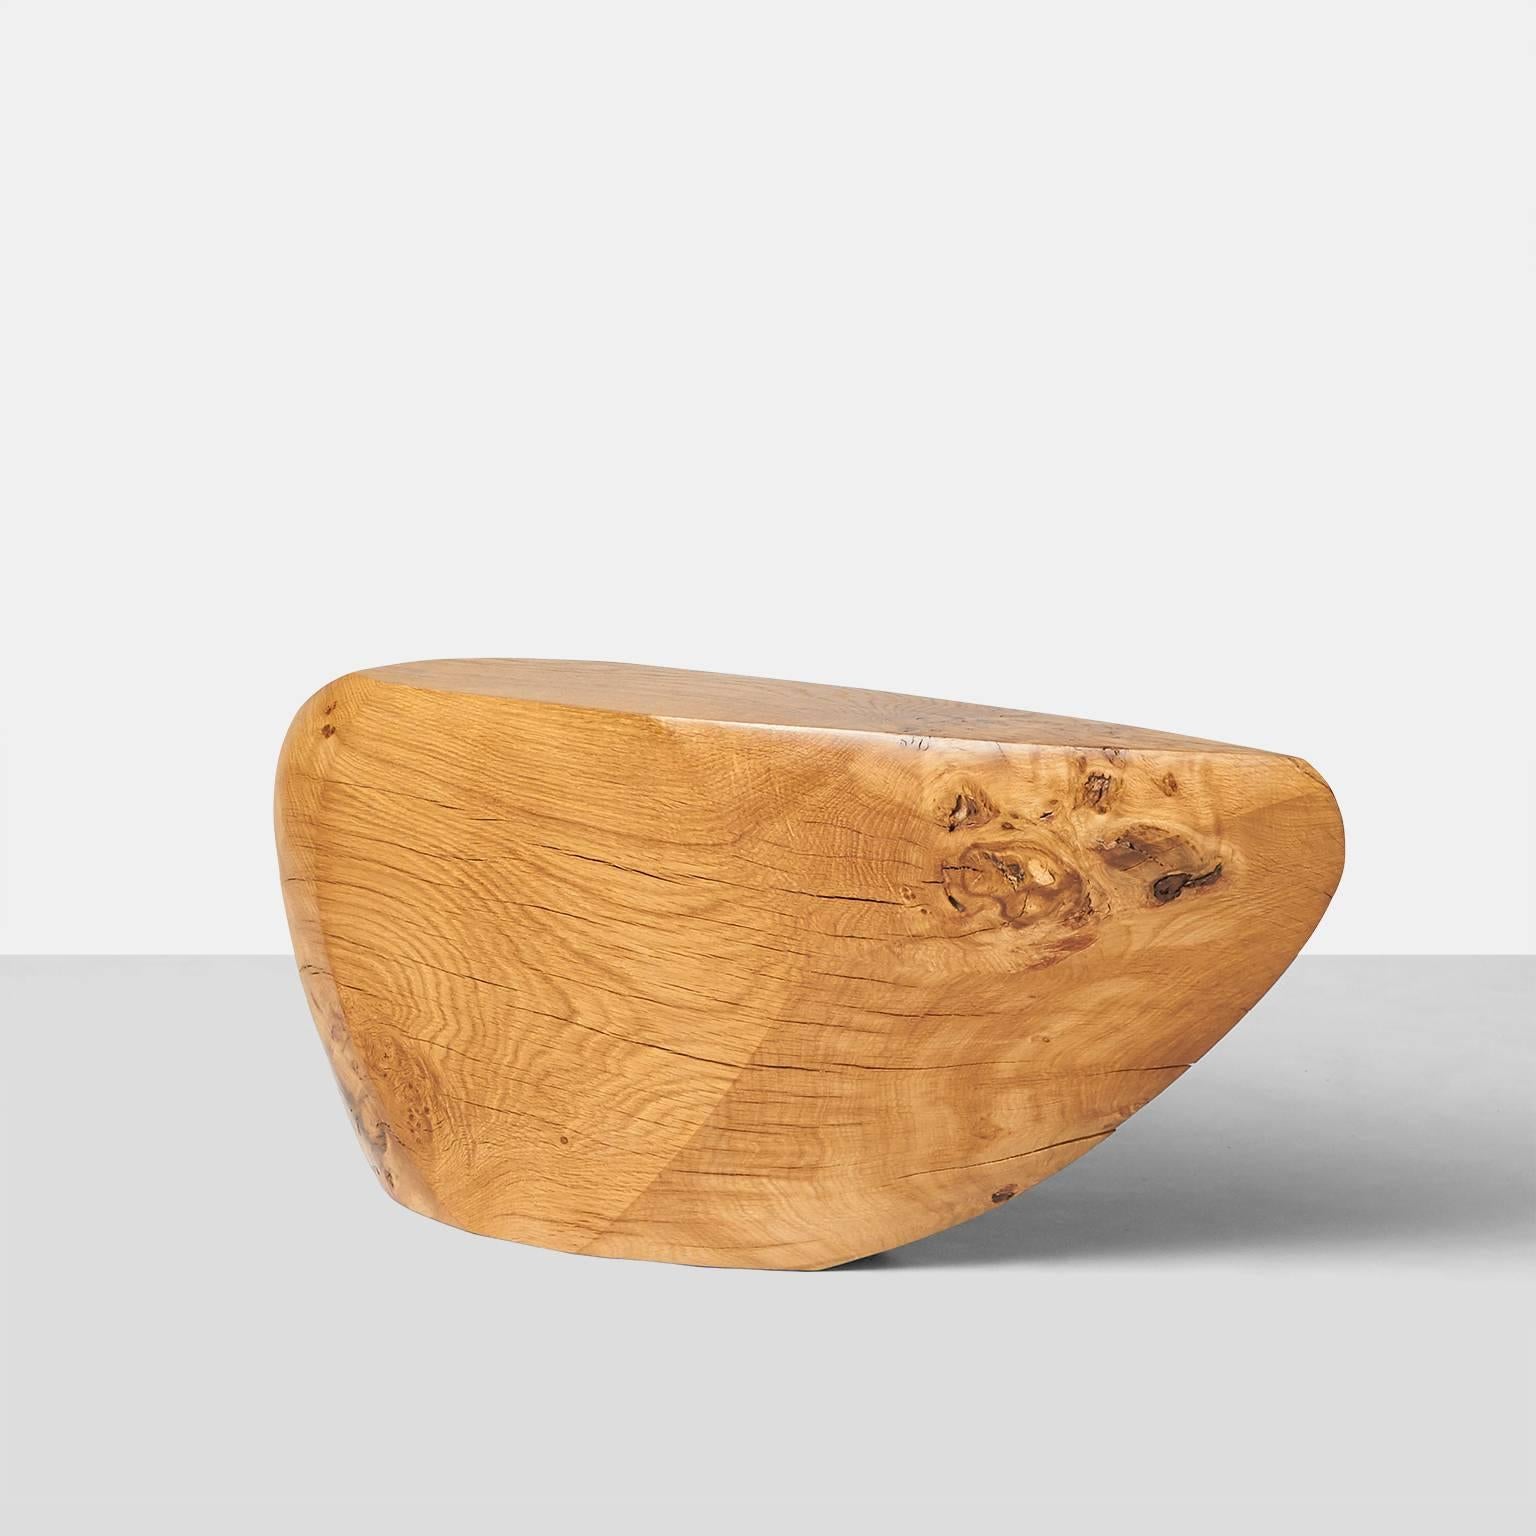 A bench or coffee table made by German artist Kaspar Hamacher from a solid piece of oak. All oak used is from naturally fallen trees. Almond and Co. is the exclusive gallery in the US to represent Kaspar Hamacher.
Netherlands, circa 2016.